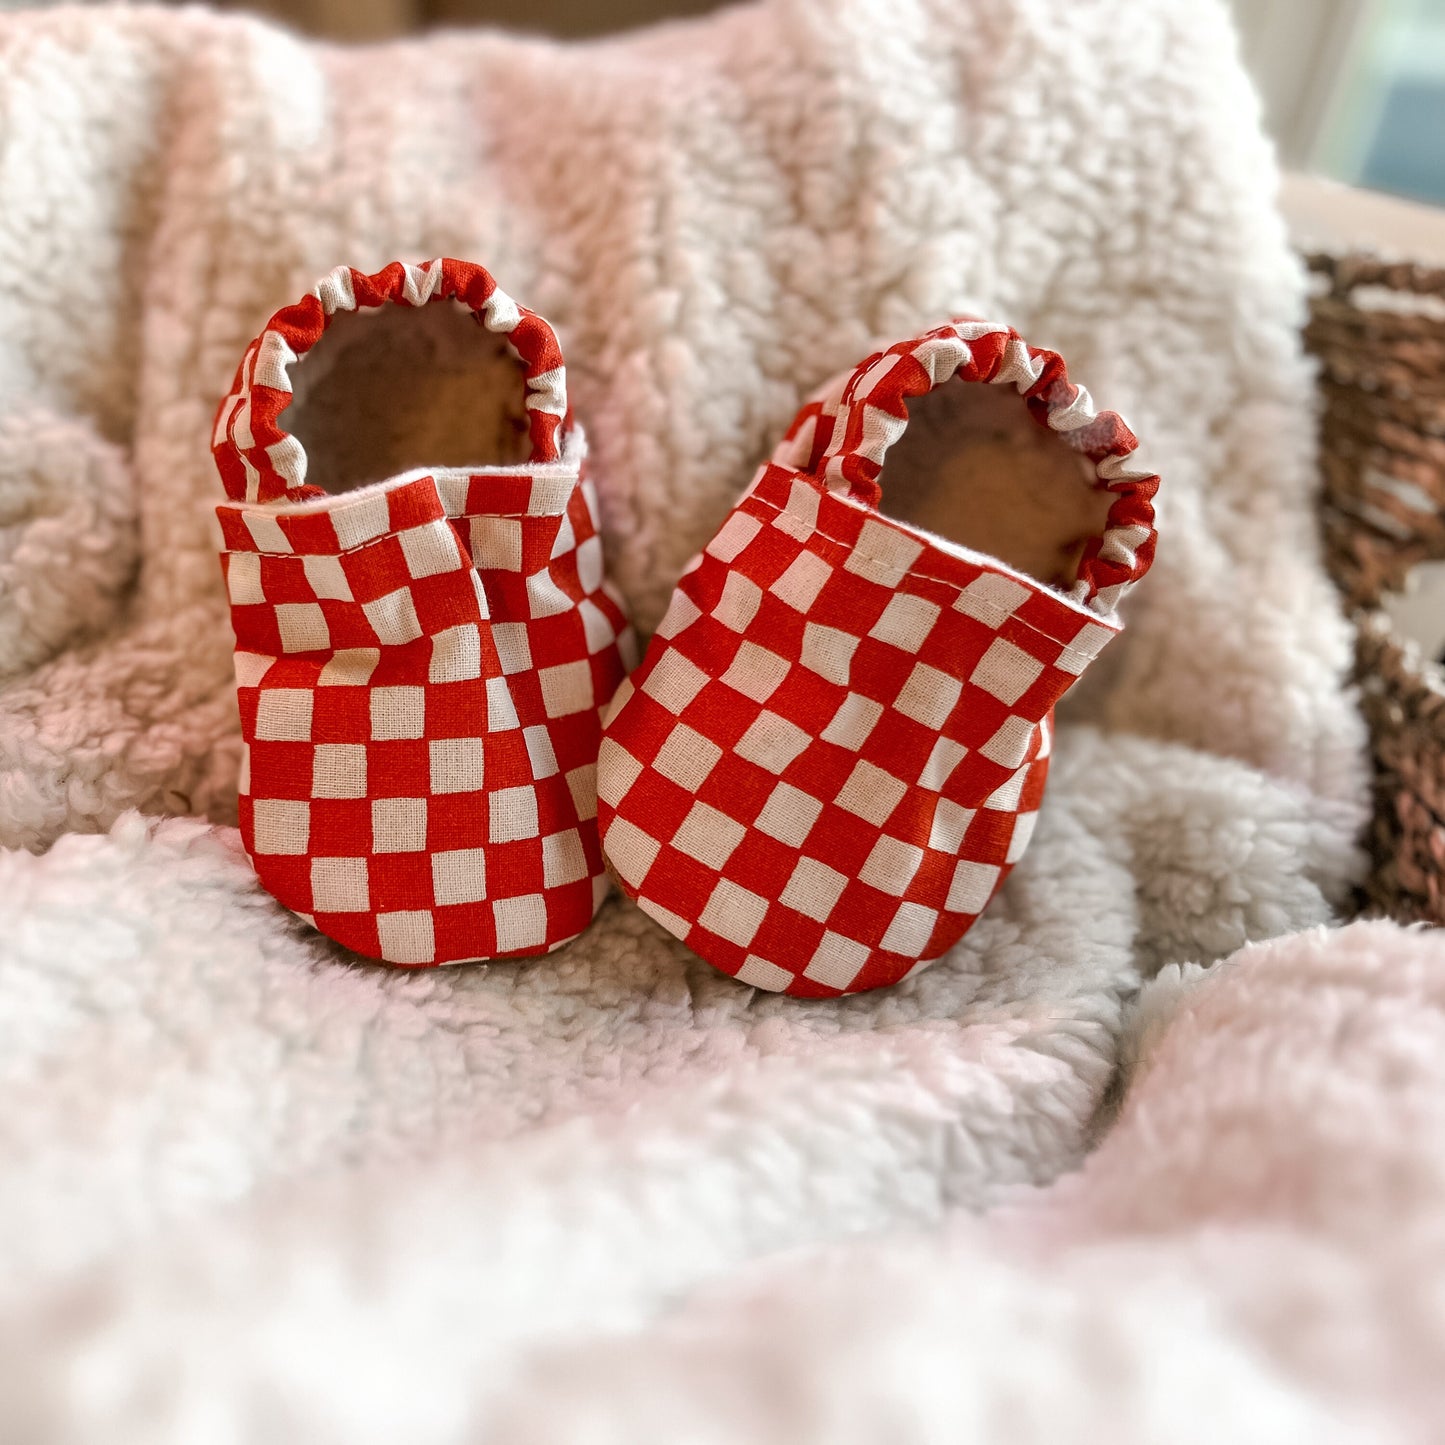 Baby Moccs, Rust Checker, Baby Booties, Crib Shoes, Soft Sole Shoes, Barefoot Shoes, Baby Shoes, Moccasins, Trendy Baby, Baby Gift